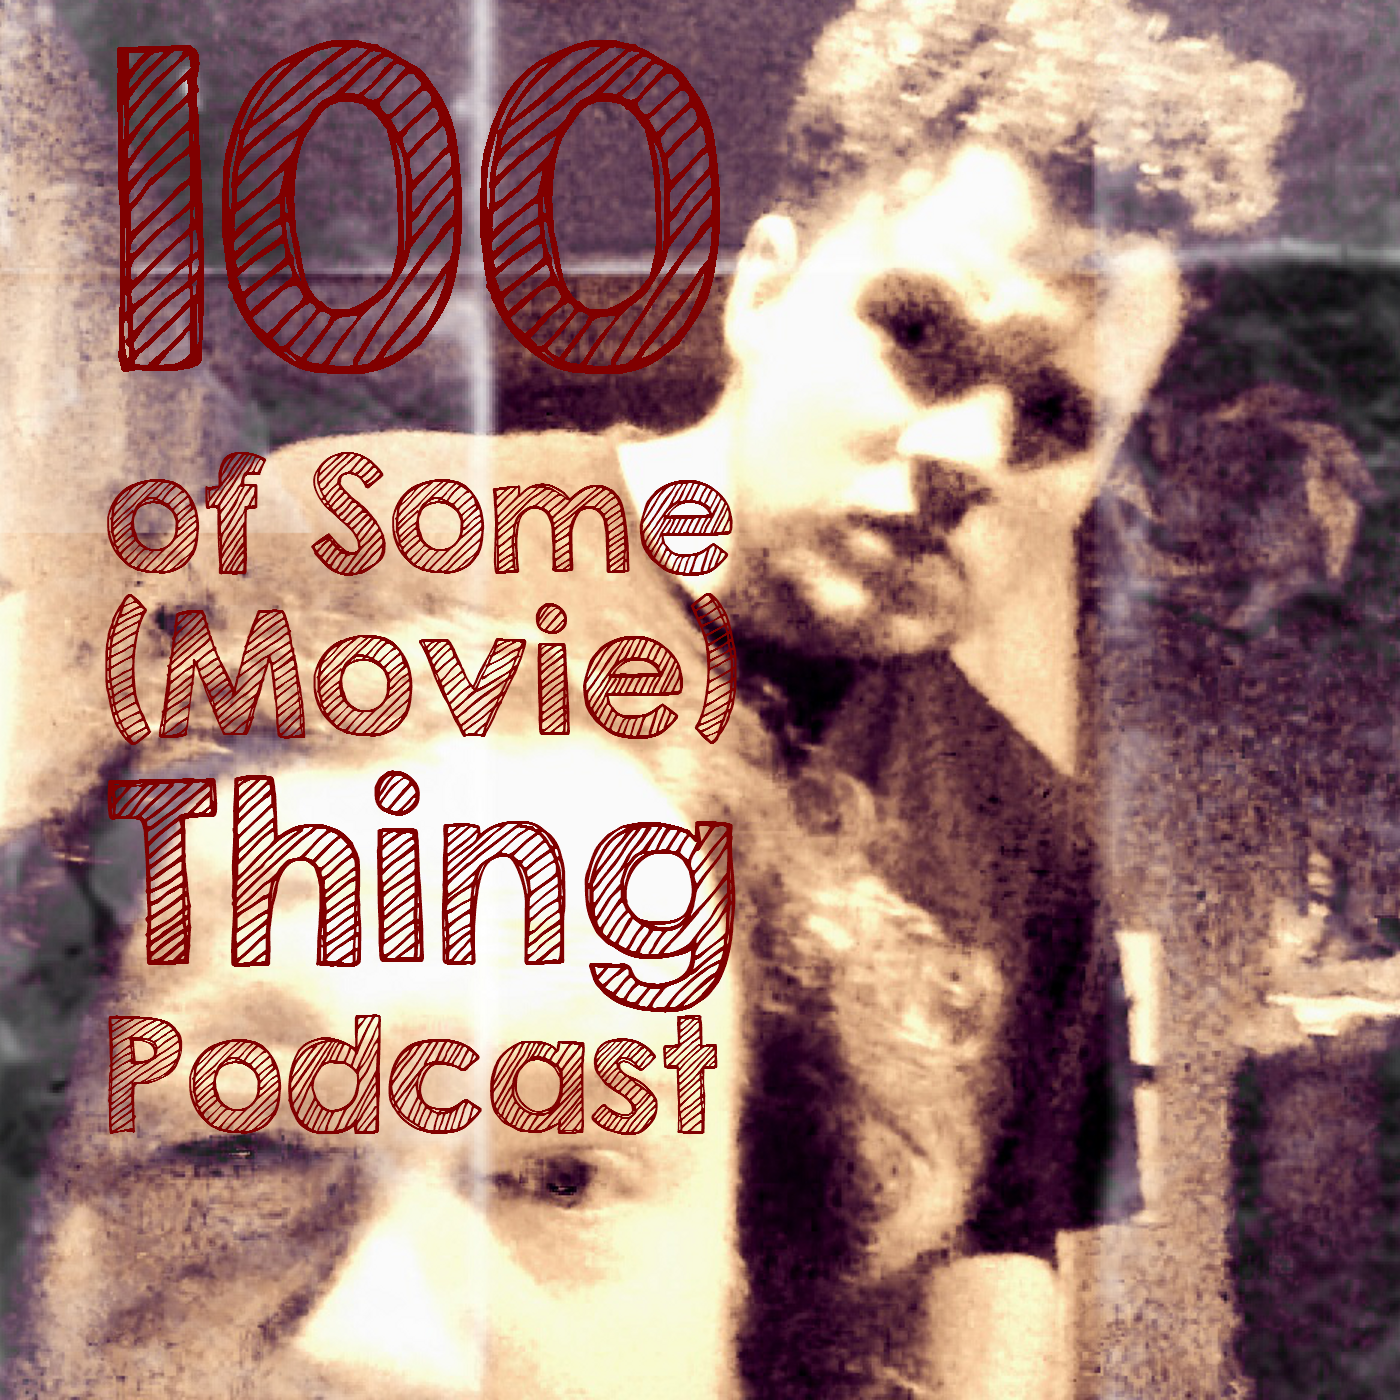 100 of Some(Movie)Thing 033, Unforgiven